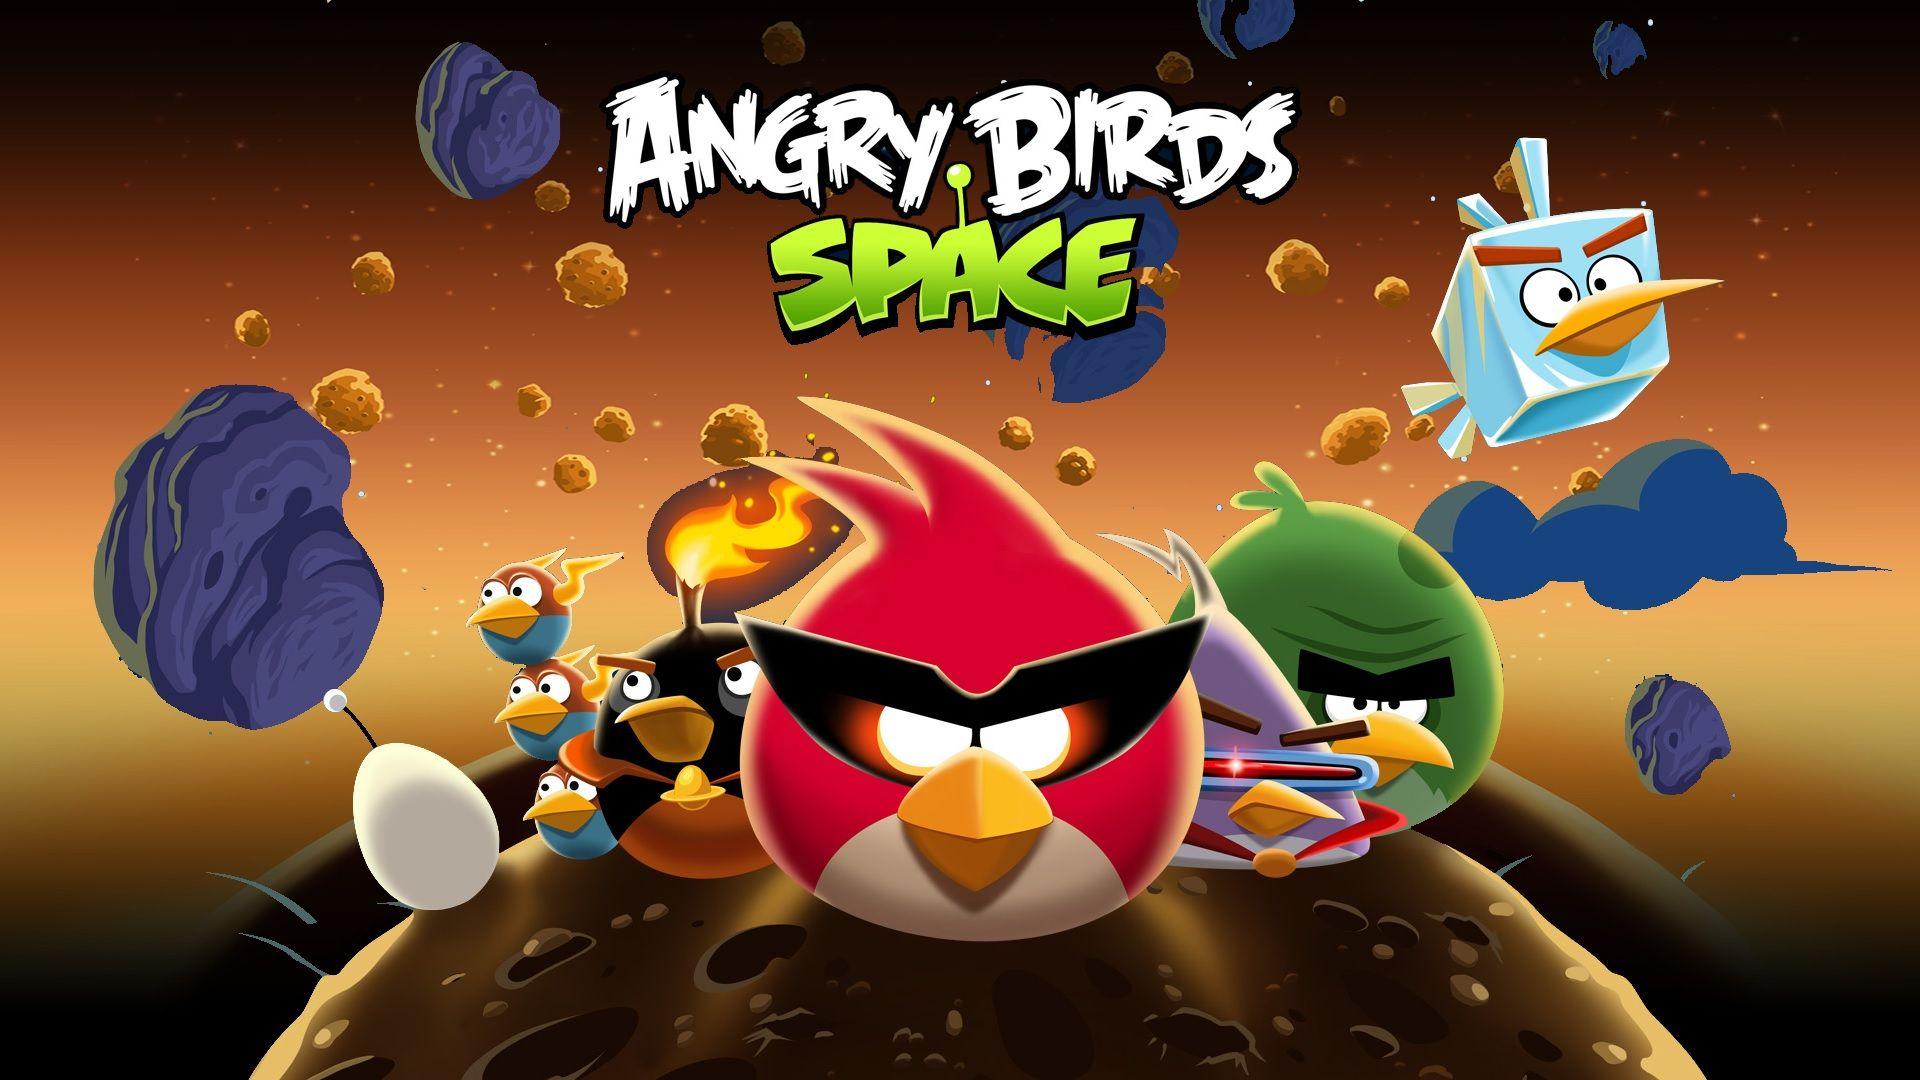 Angry Birds Space Wallpapers Top Free Angry Birds Space Backgrounds Wallpaperaccess